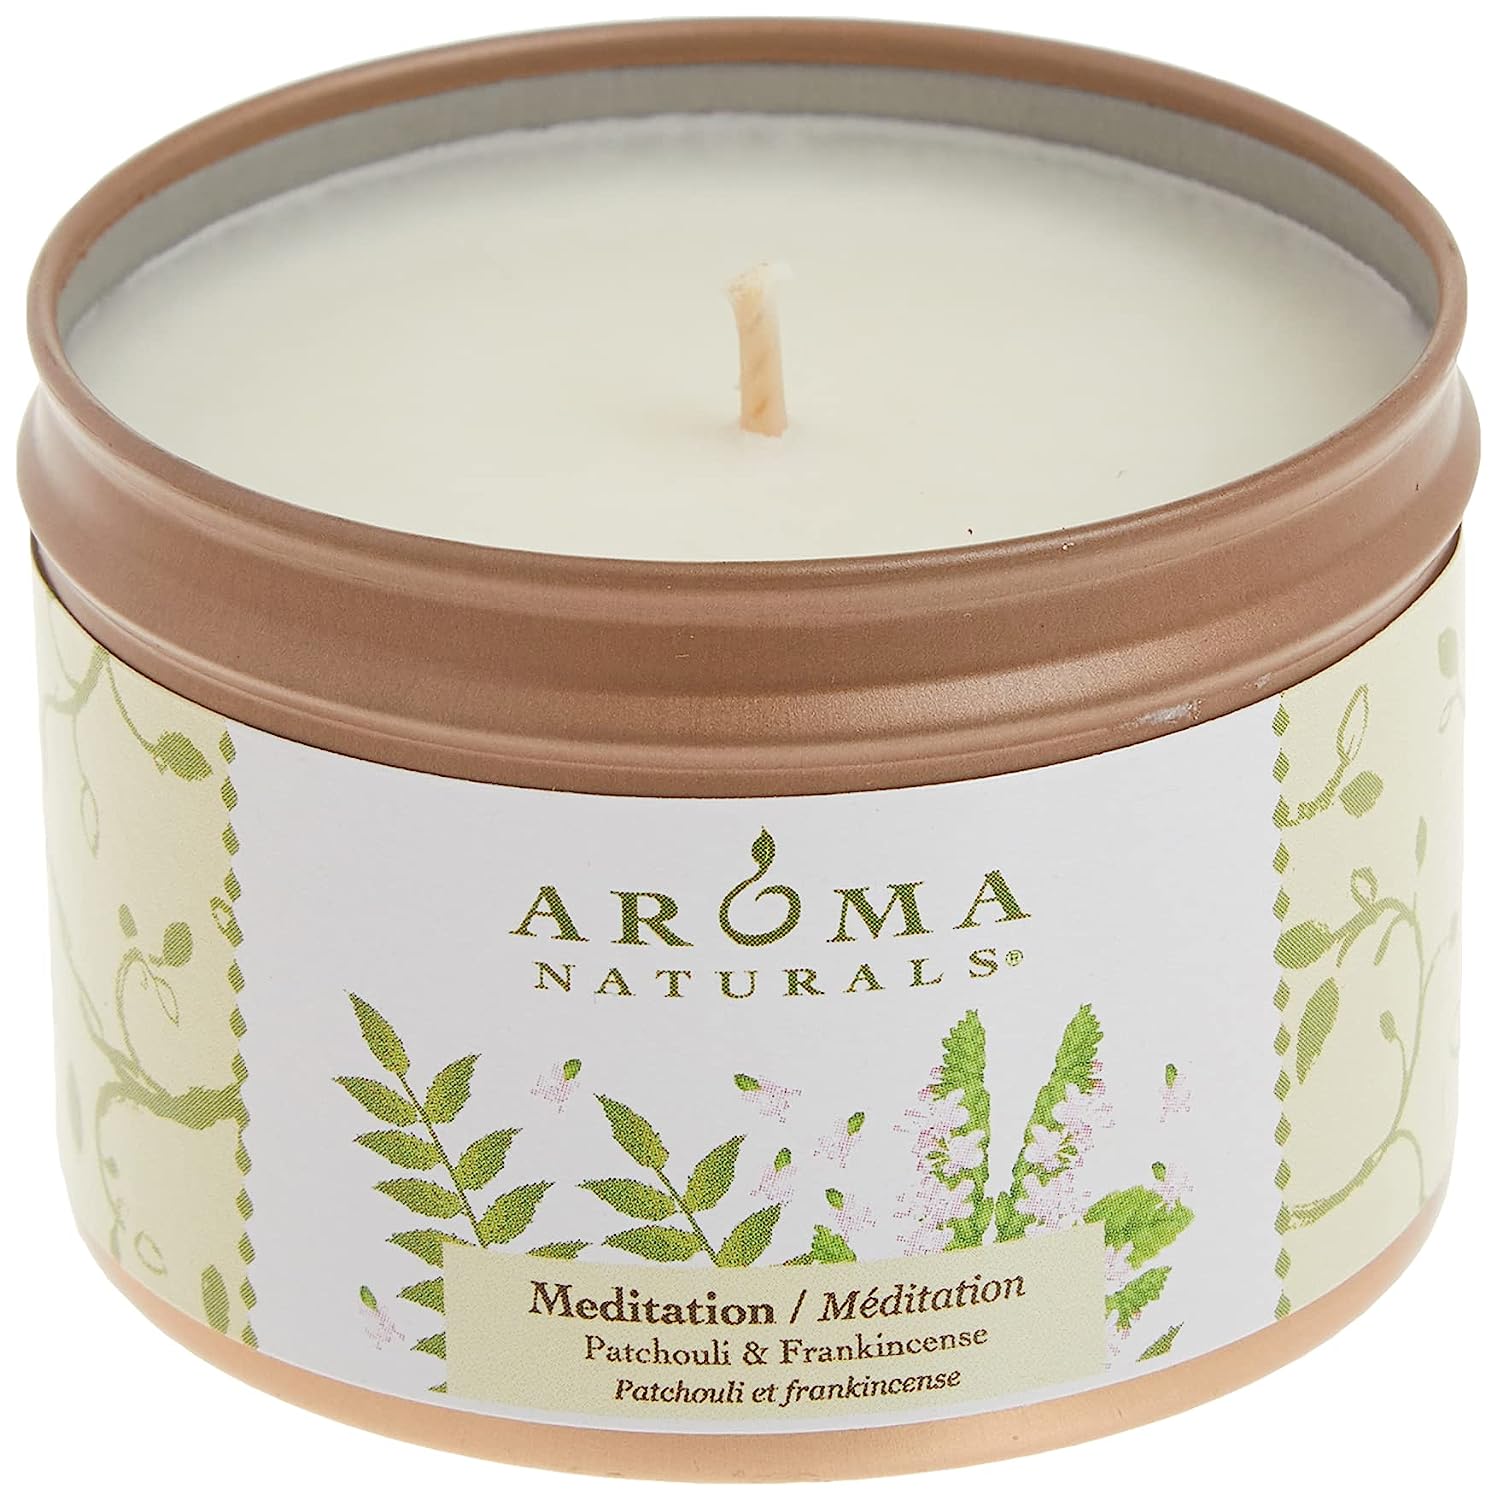 Aroma Naturals Tin Candle with Patchouli and Frankincense Essential Oil Natural Soy Scented, Meditation, 2 Count - image 3 of 6